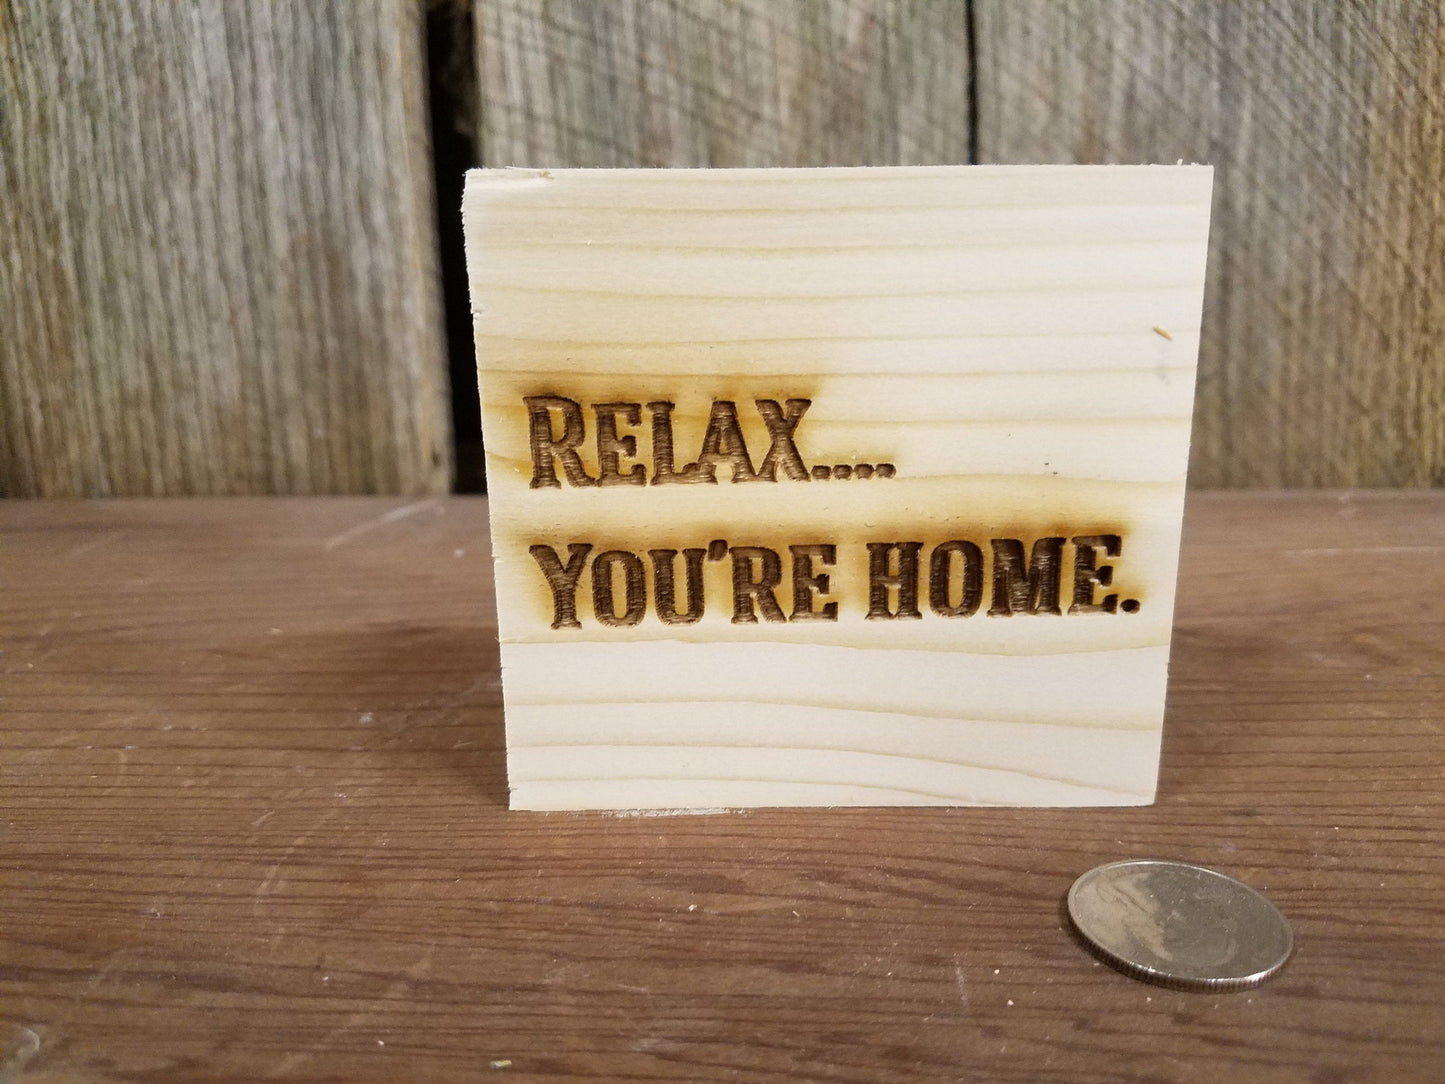 Relax Your Home, Engraved, Wood, Block, Decor, Rustic, Pine, Tiered Tray, Handmade, Primitive, Self Sitter, Free Standing